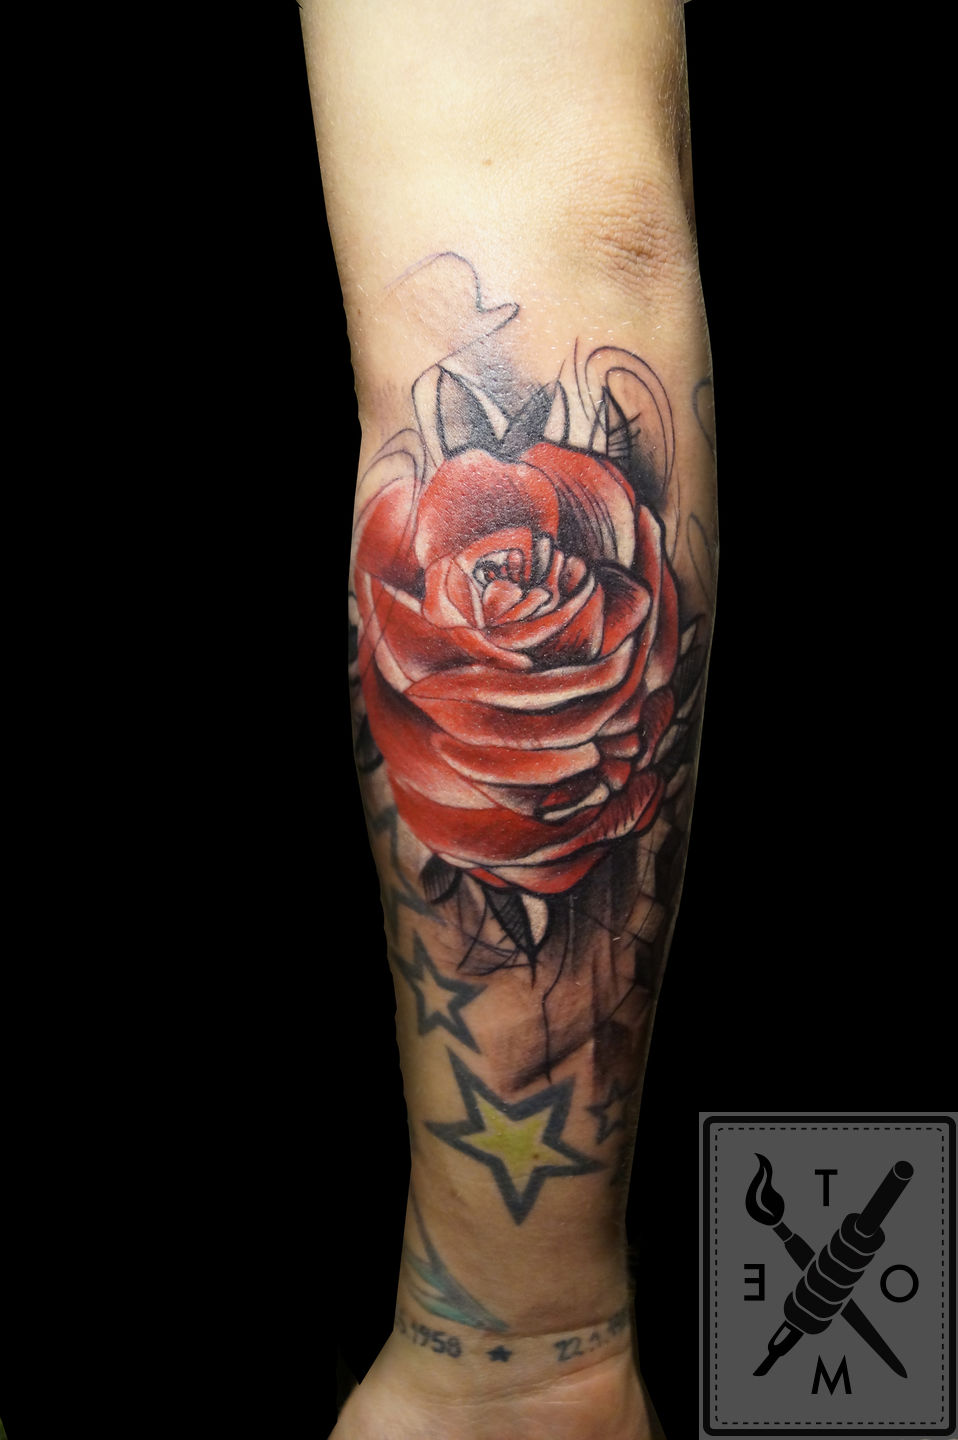 Abstract Rose by rolytattoos guesting at Faces in the Dark  Kyle TX   rtattoos